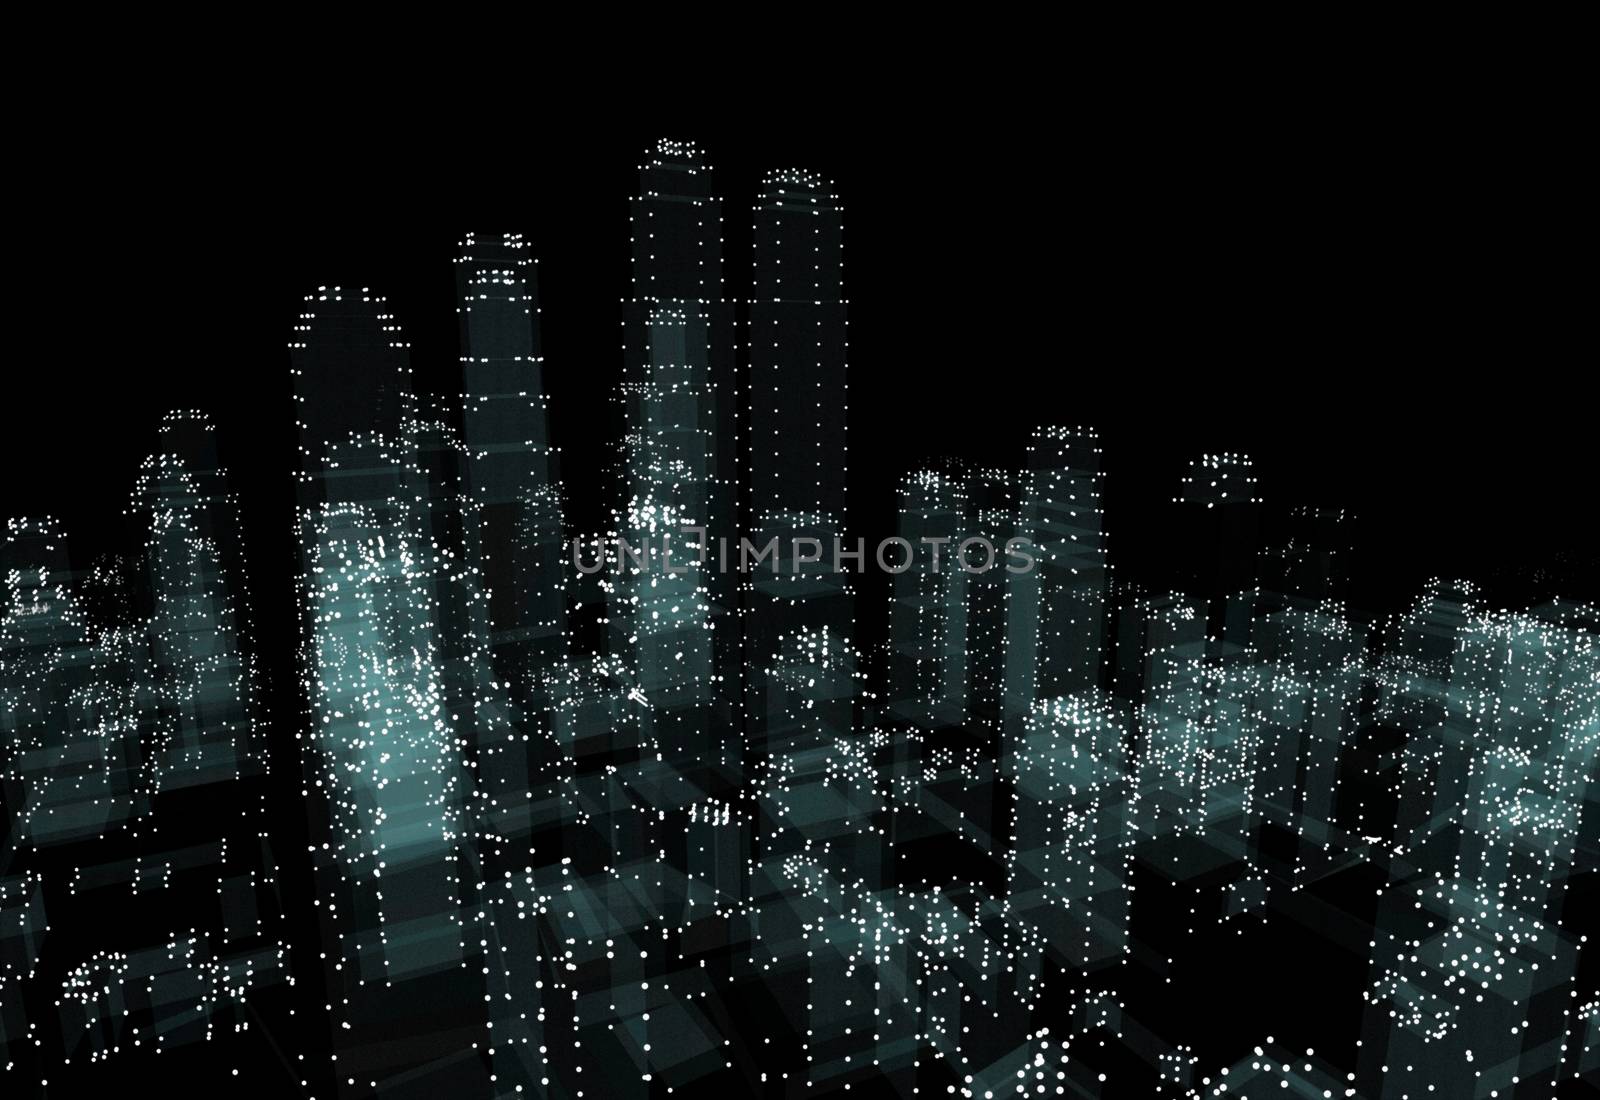 Abstract 3d city rendering by cherezoff